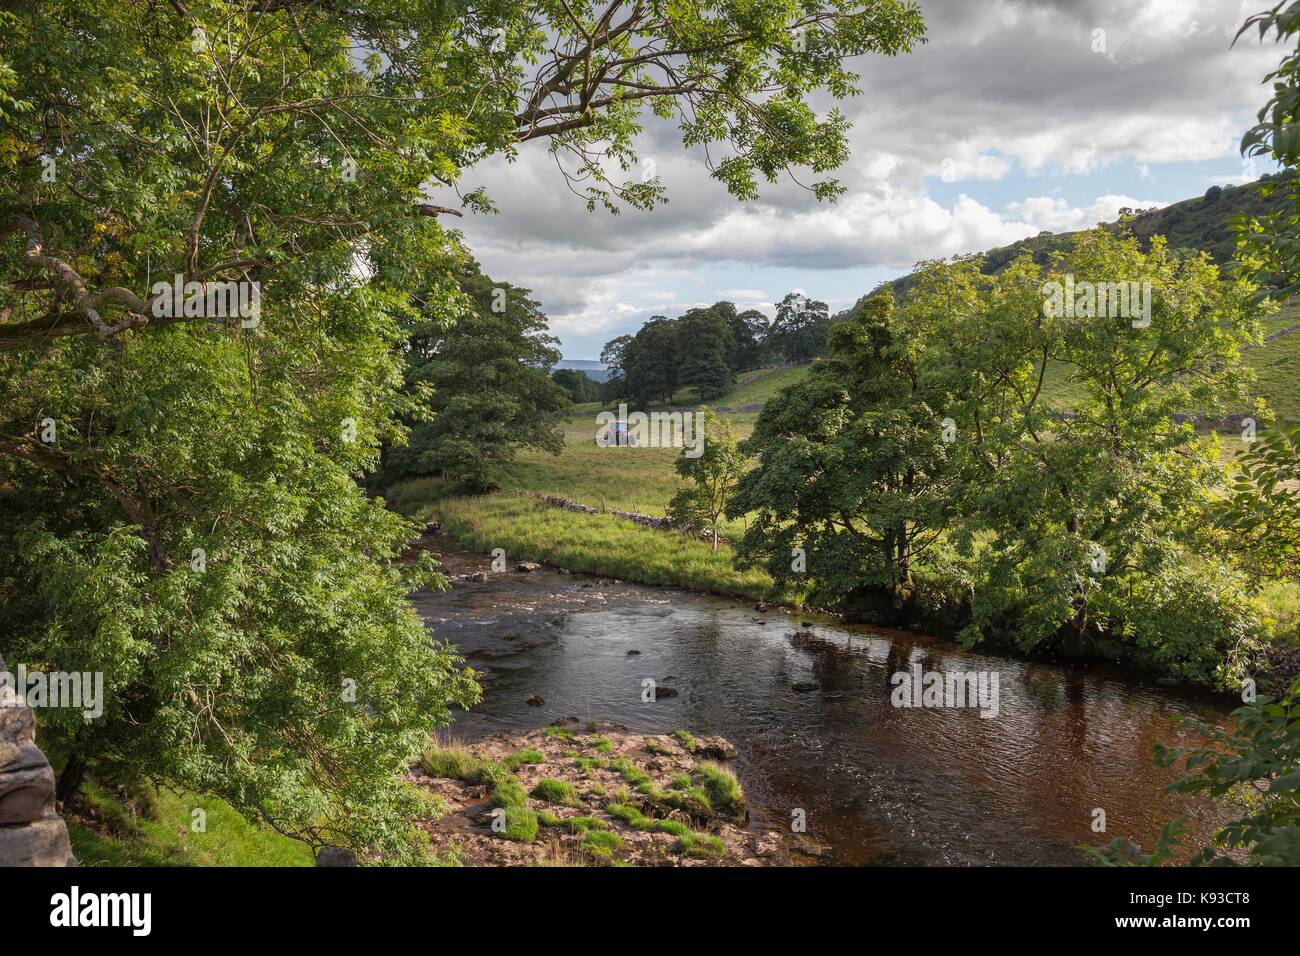 River wharfe, wharfedale, Yorkshire Dales national park, England. Banque D'Images